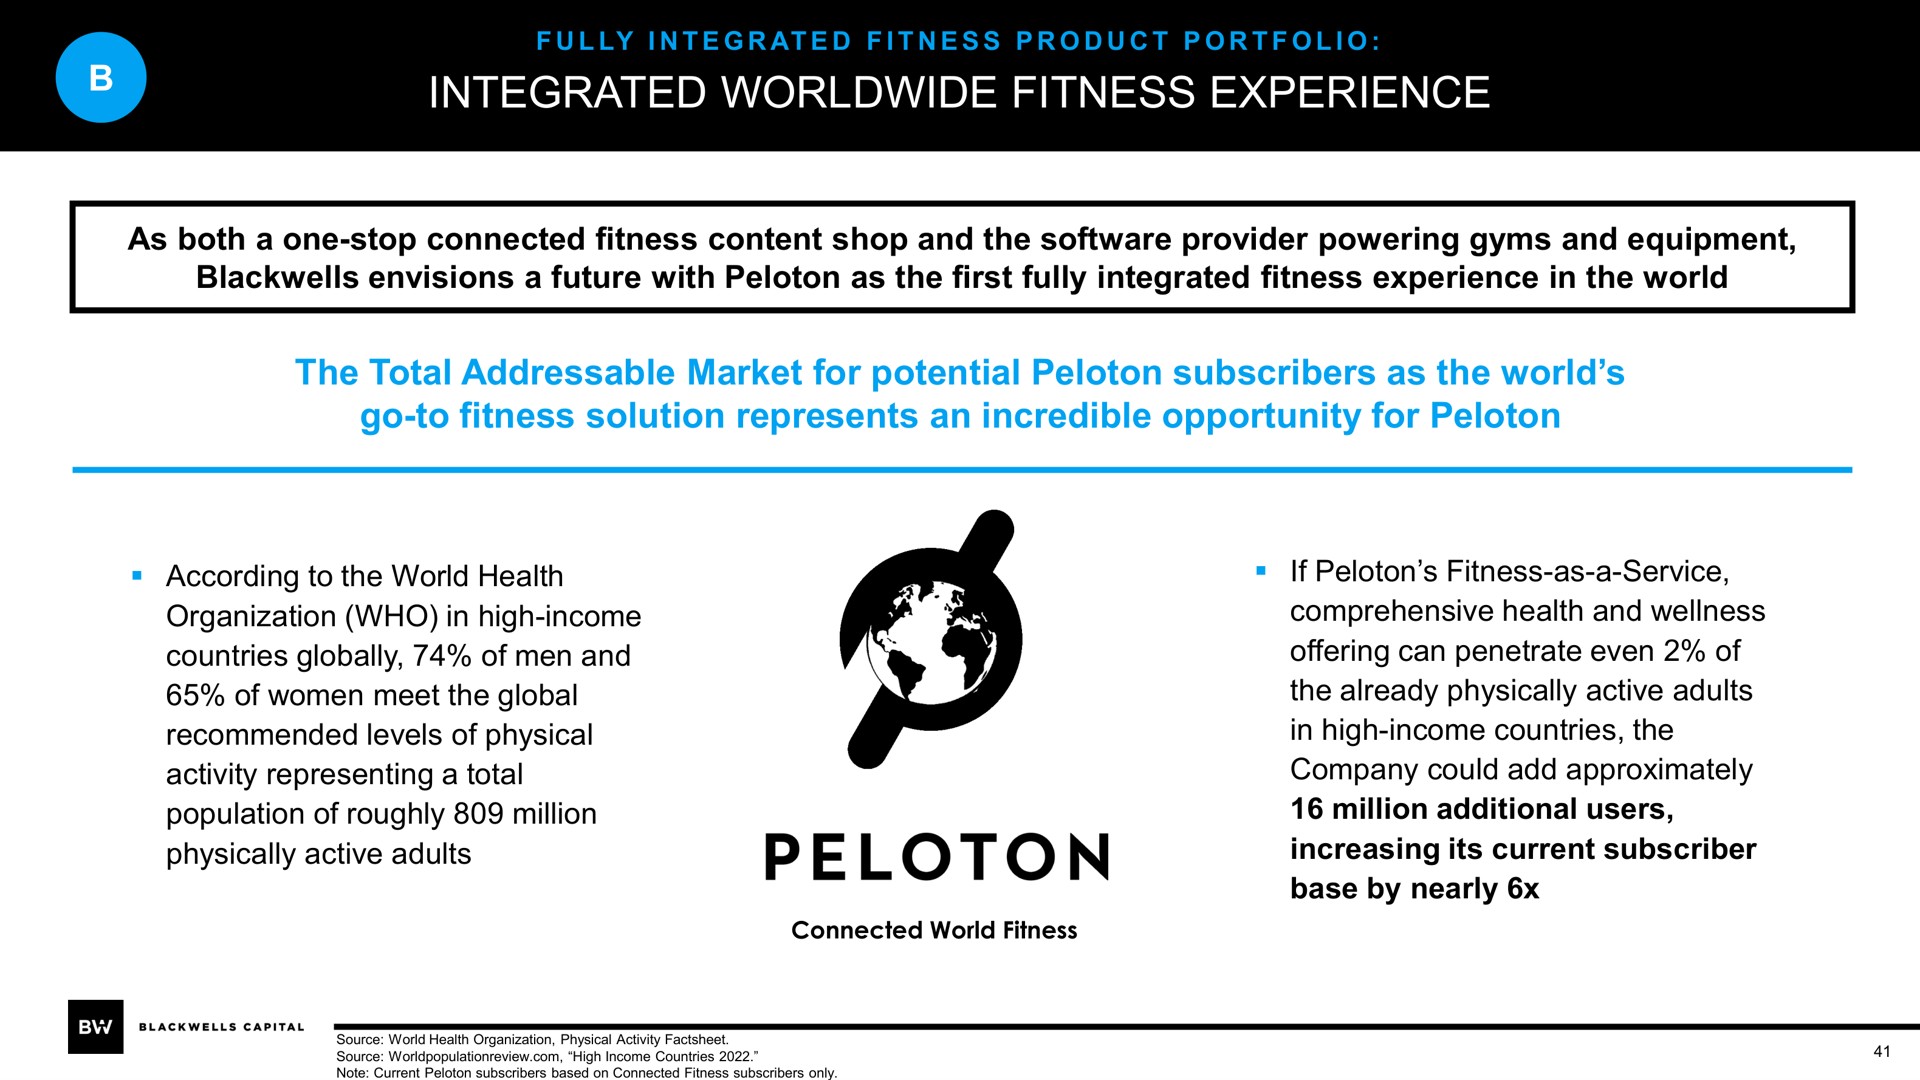 integrated fitness experience the total market for potential peloton subscribers as the world go to fitness solution represents an incredible opportunity for peloton | Blackwells Capital